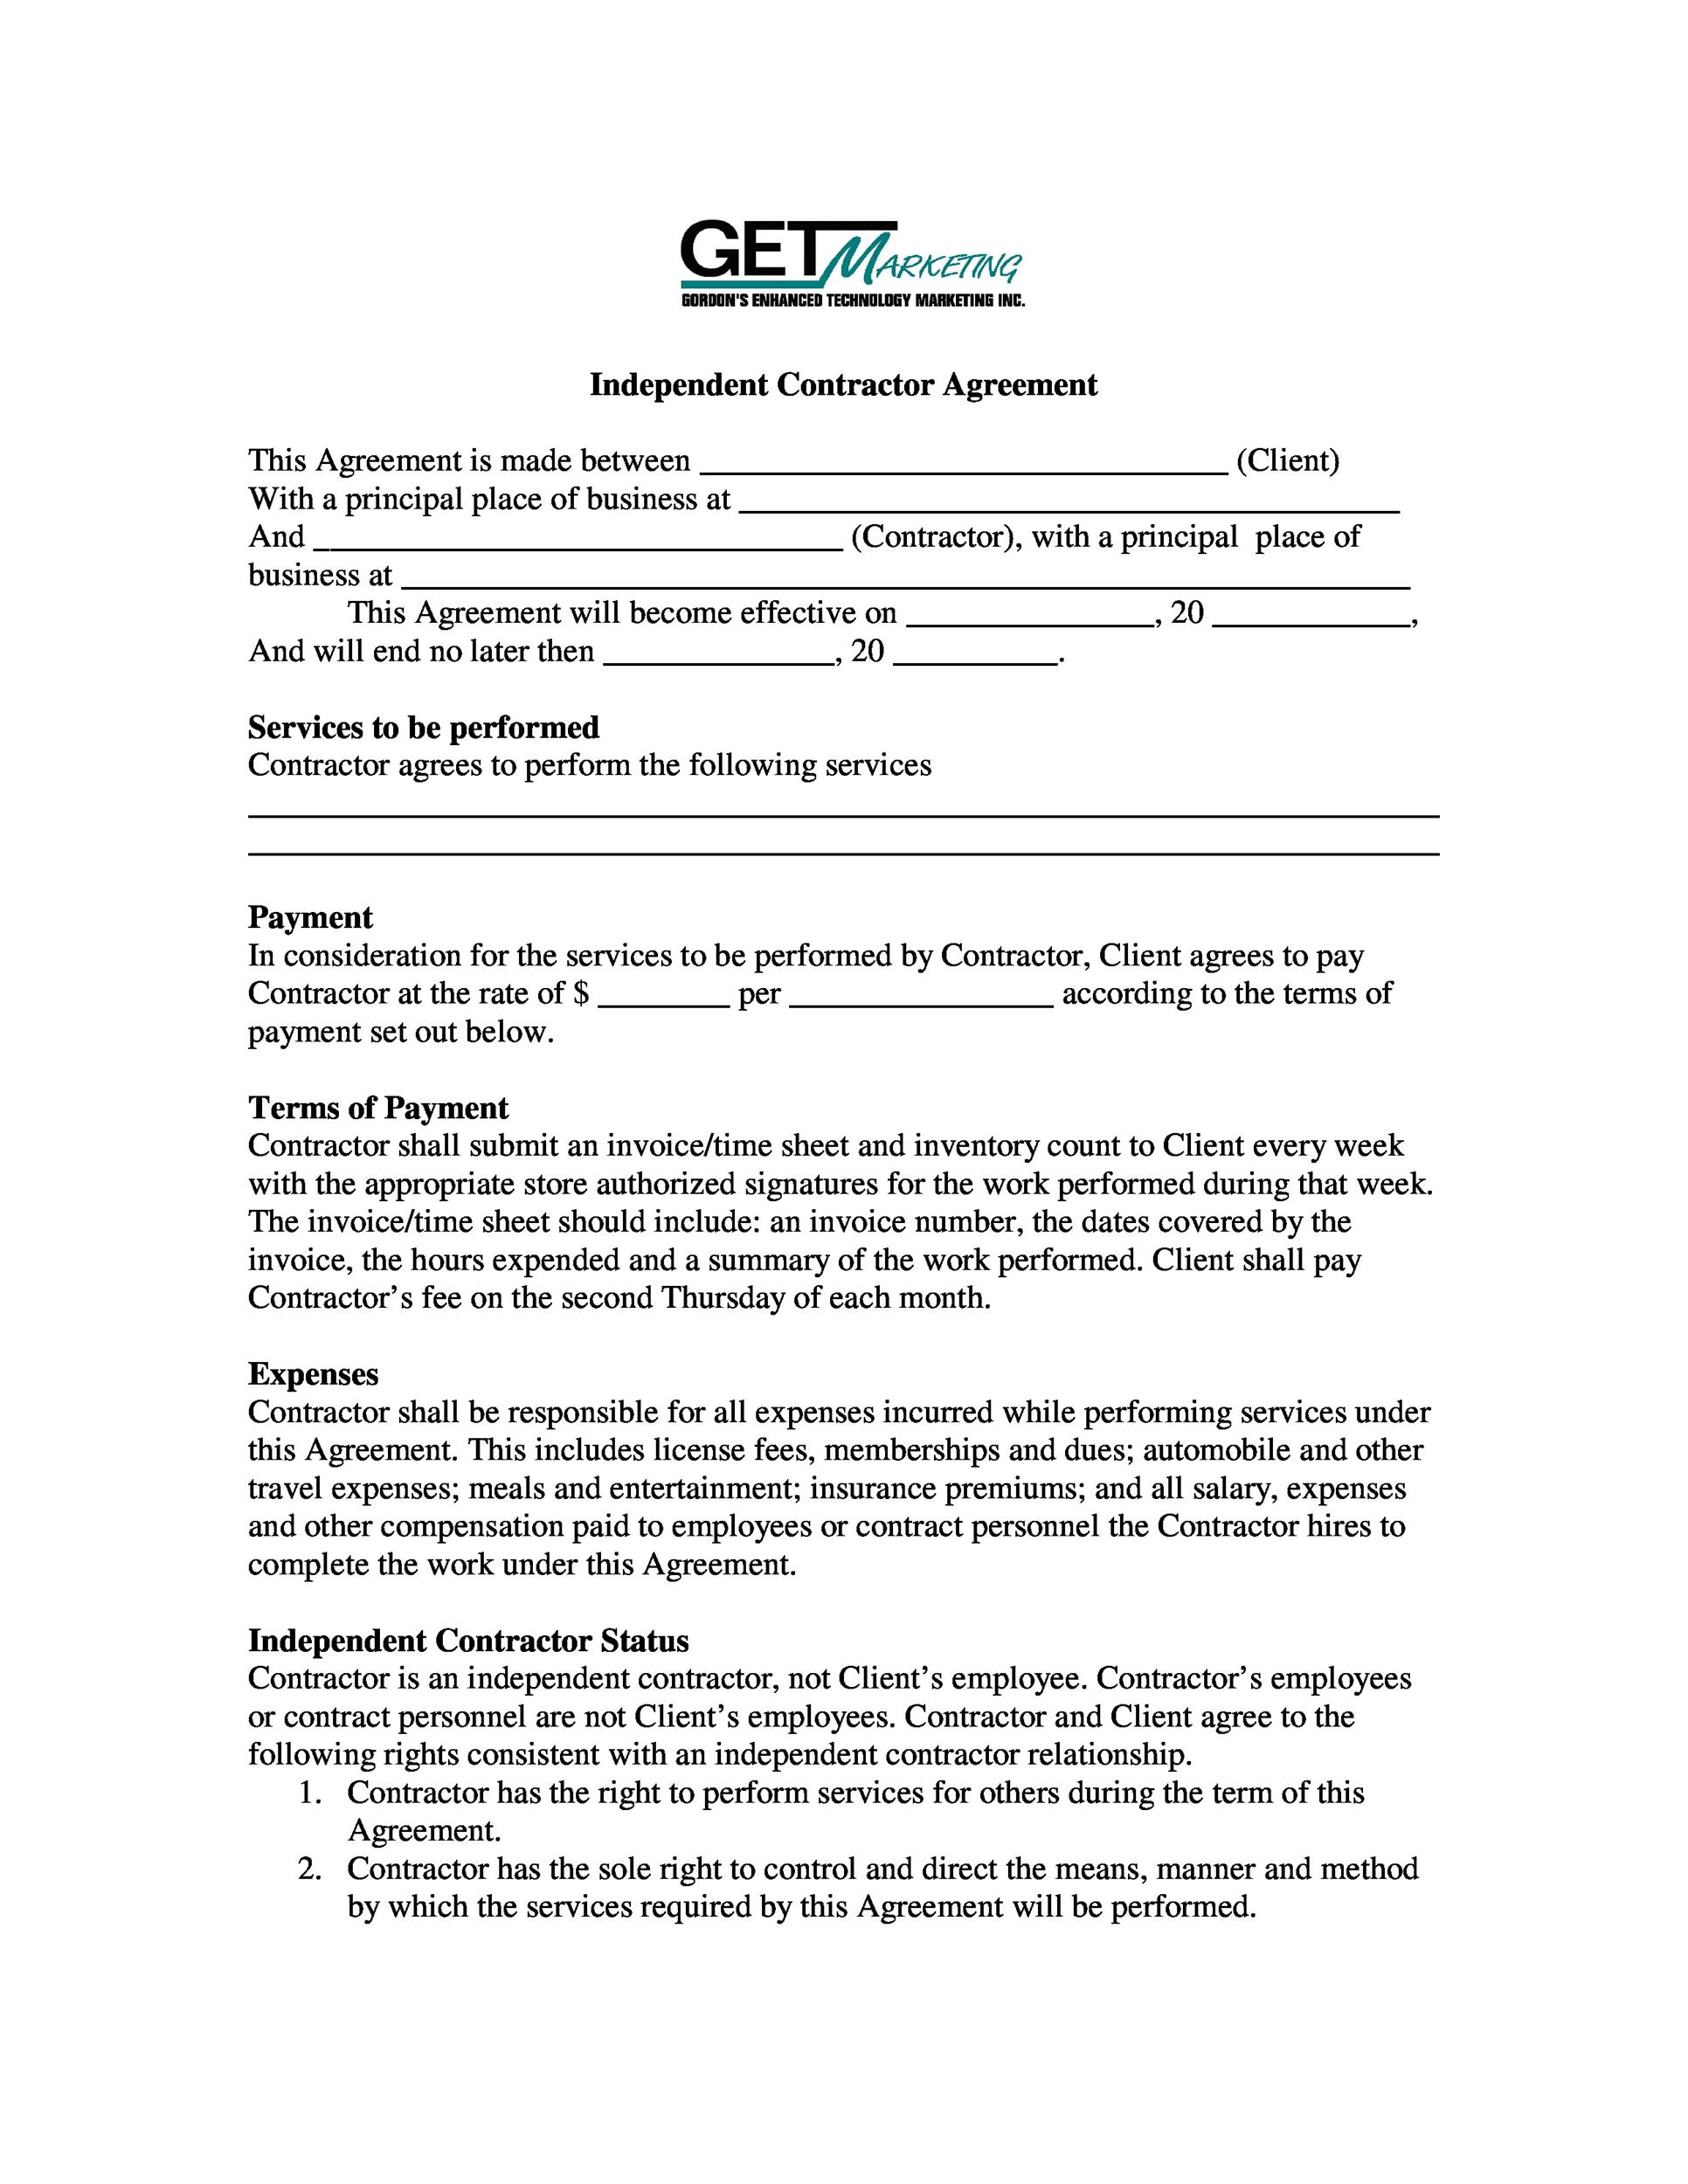 50+ FREE Independent Contractor Agreement Forms \u0026 Templates